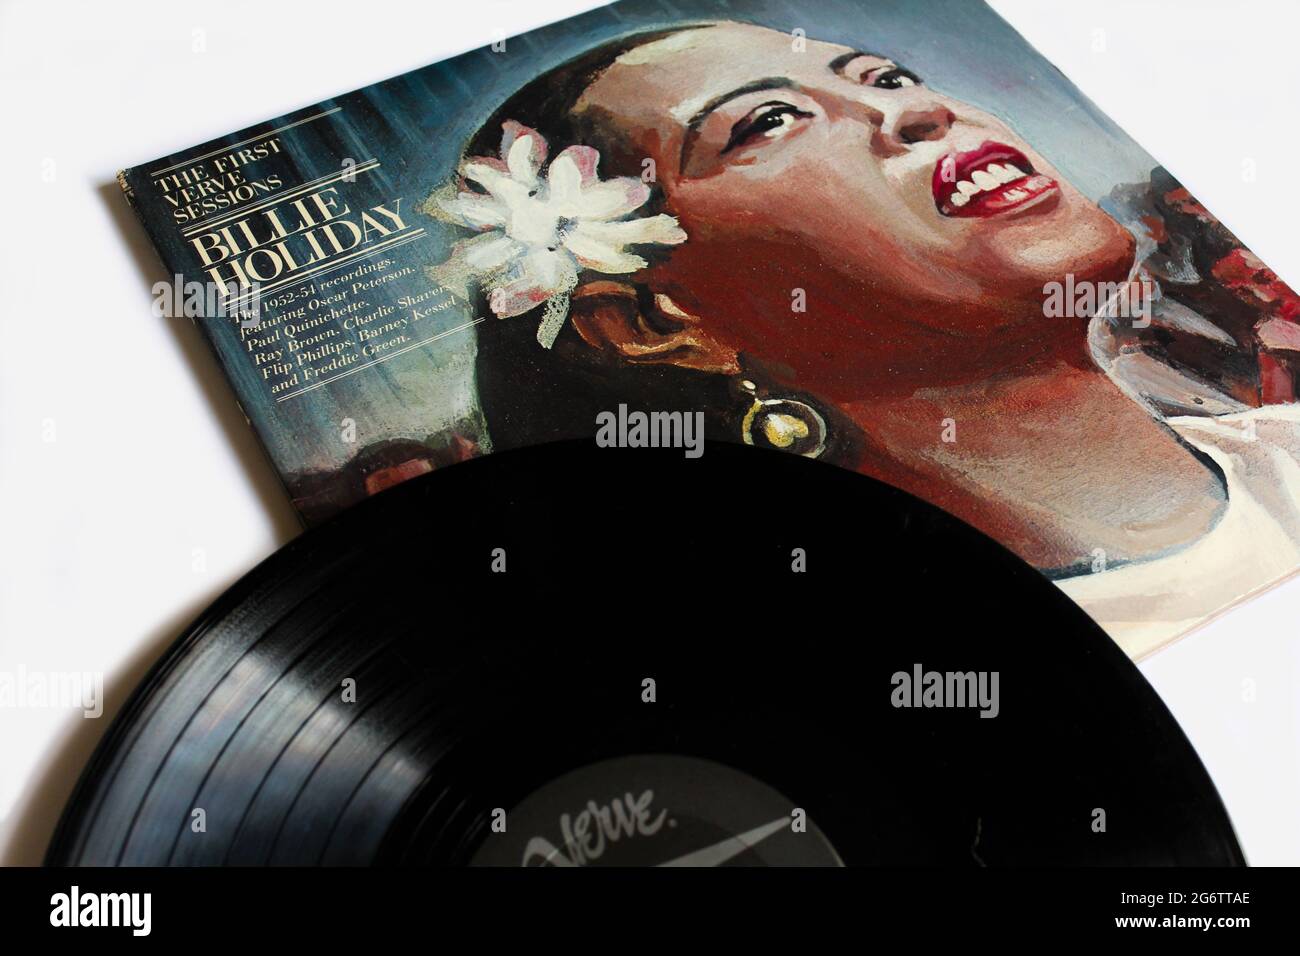 Jazz, Pop and soul artist, Billie Holiday music album on vinyl record LP disc. Titled: The First Verve Sessions album cover Stock Photo